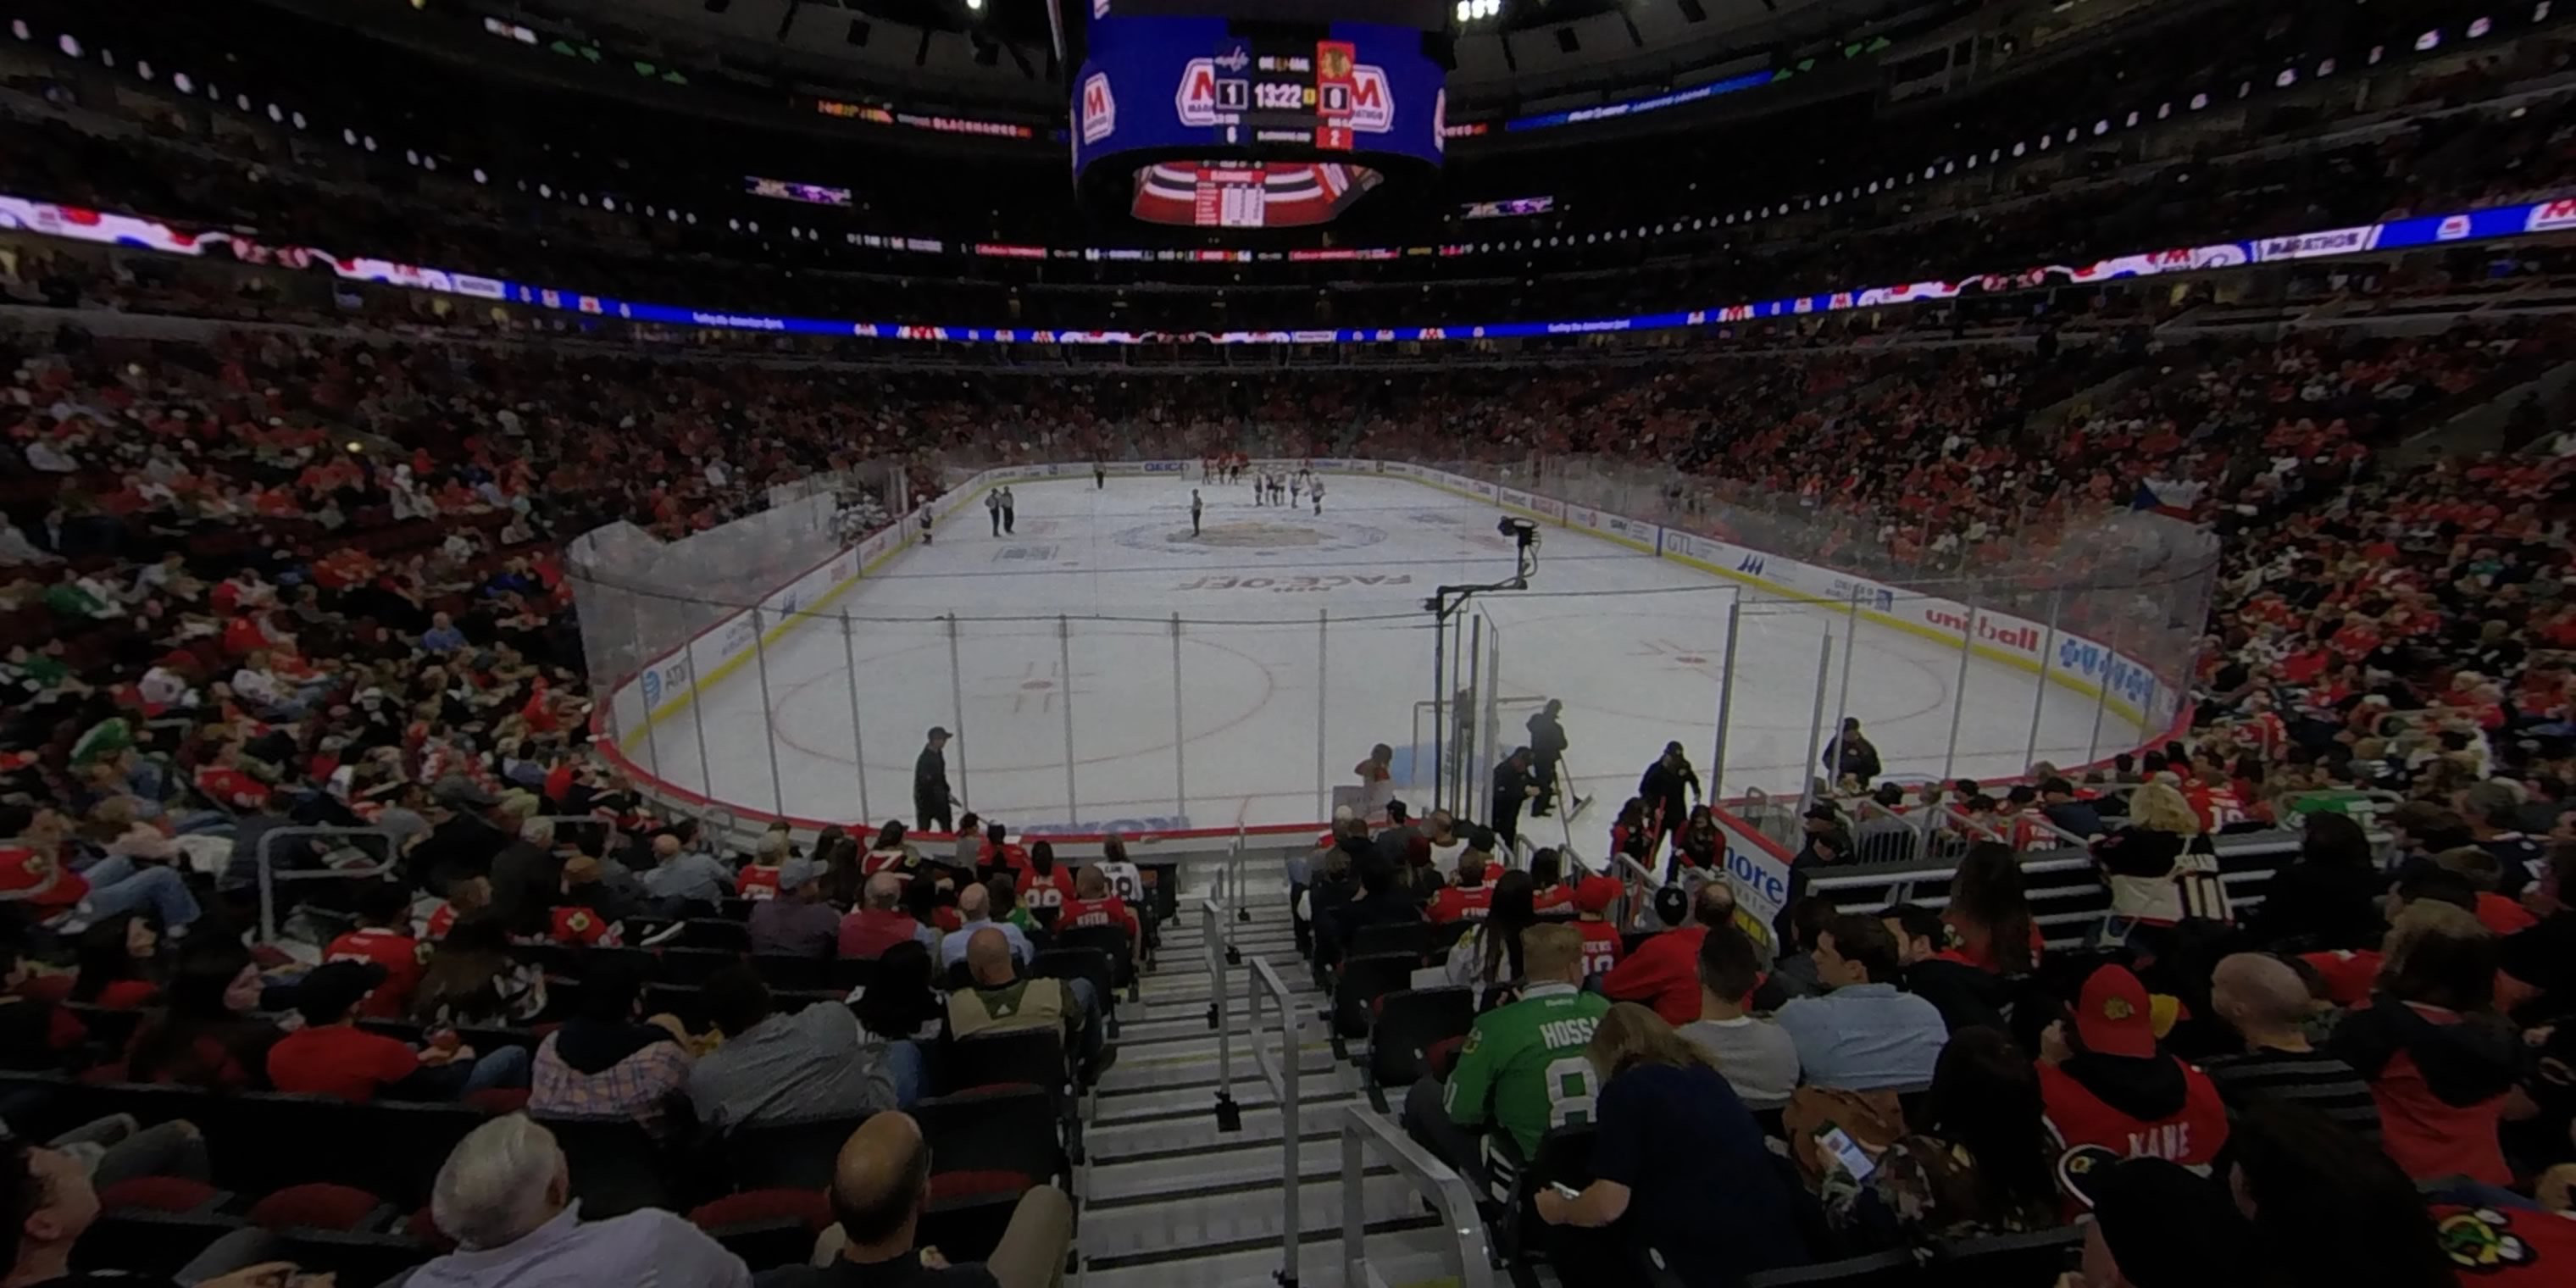 section 117 panoramic seat view  for hockey - united center